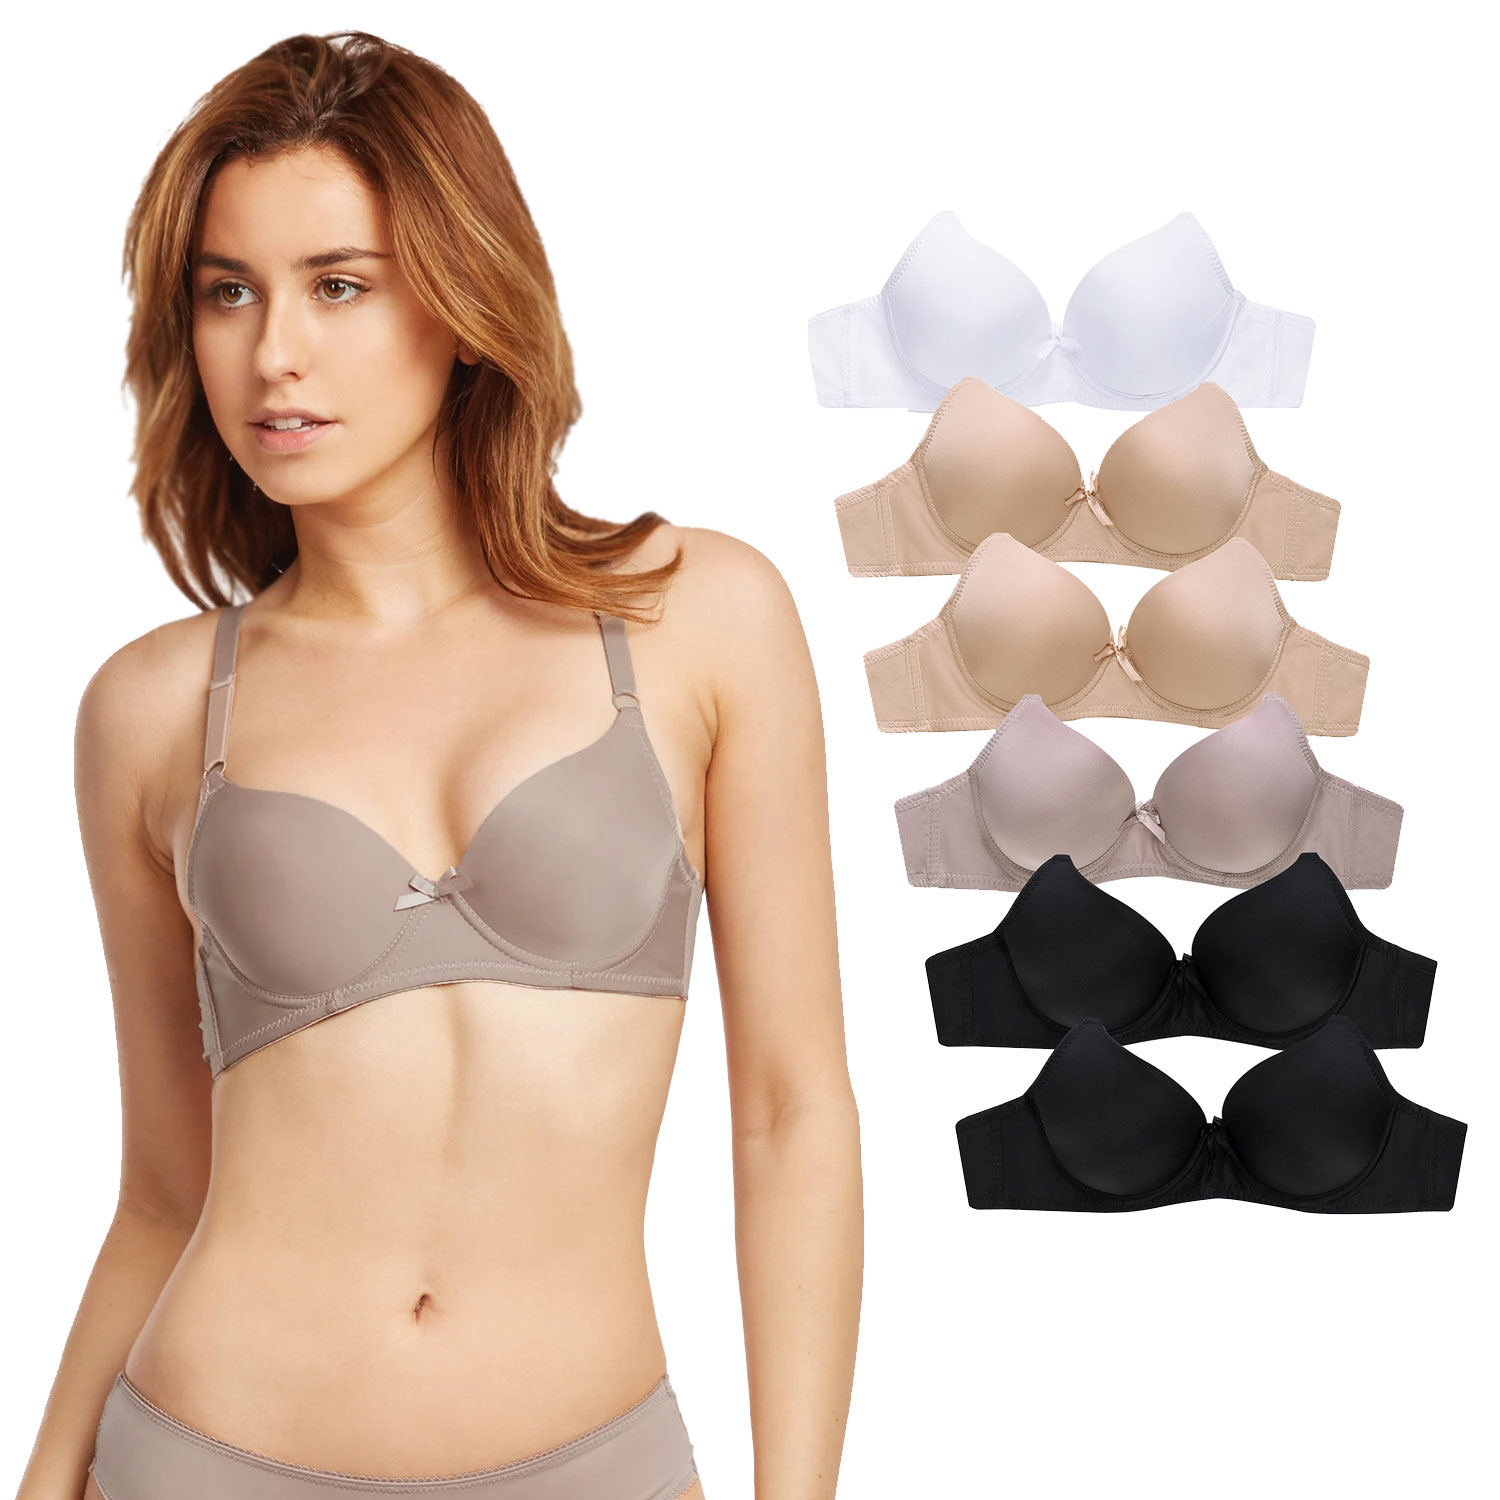 6 Pack Ladies Full Cup Plain Bra - $18.74 + Free Shipping